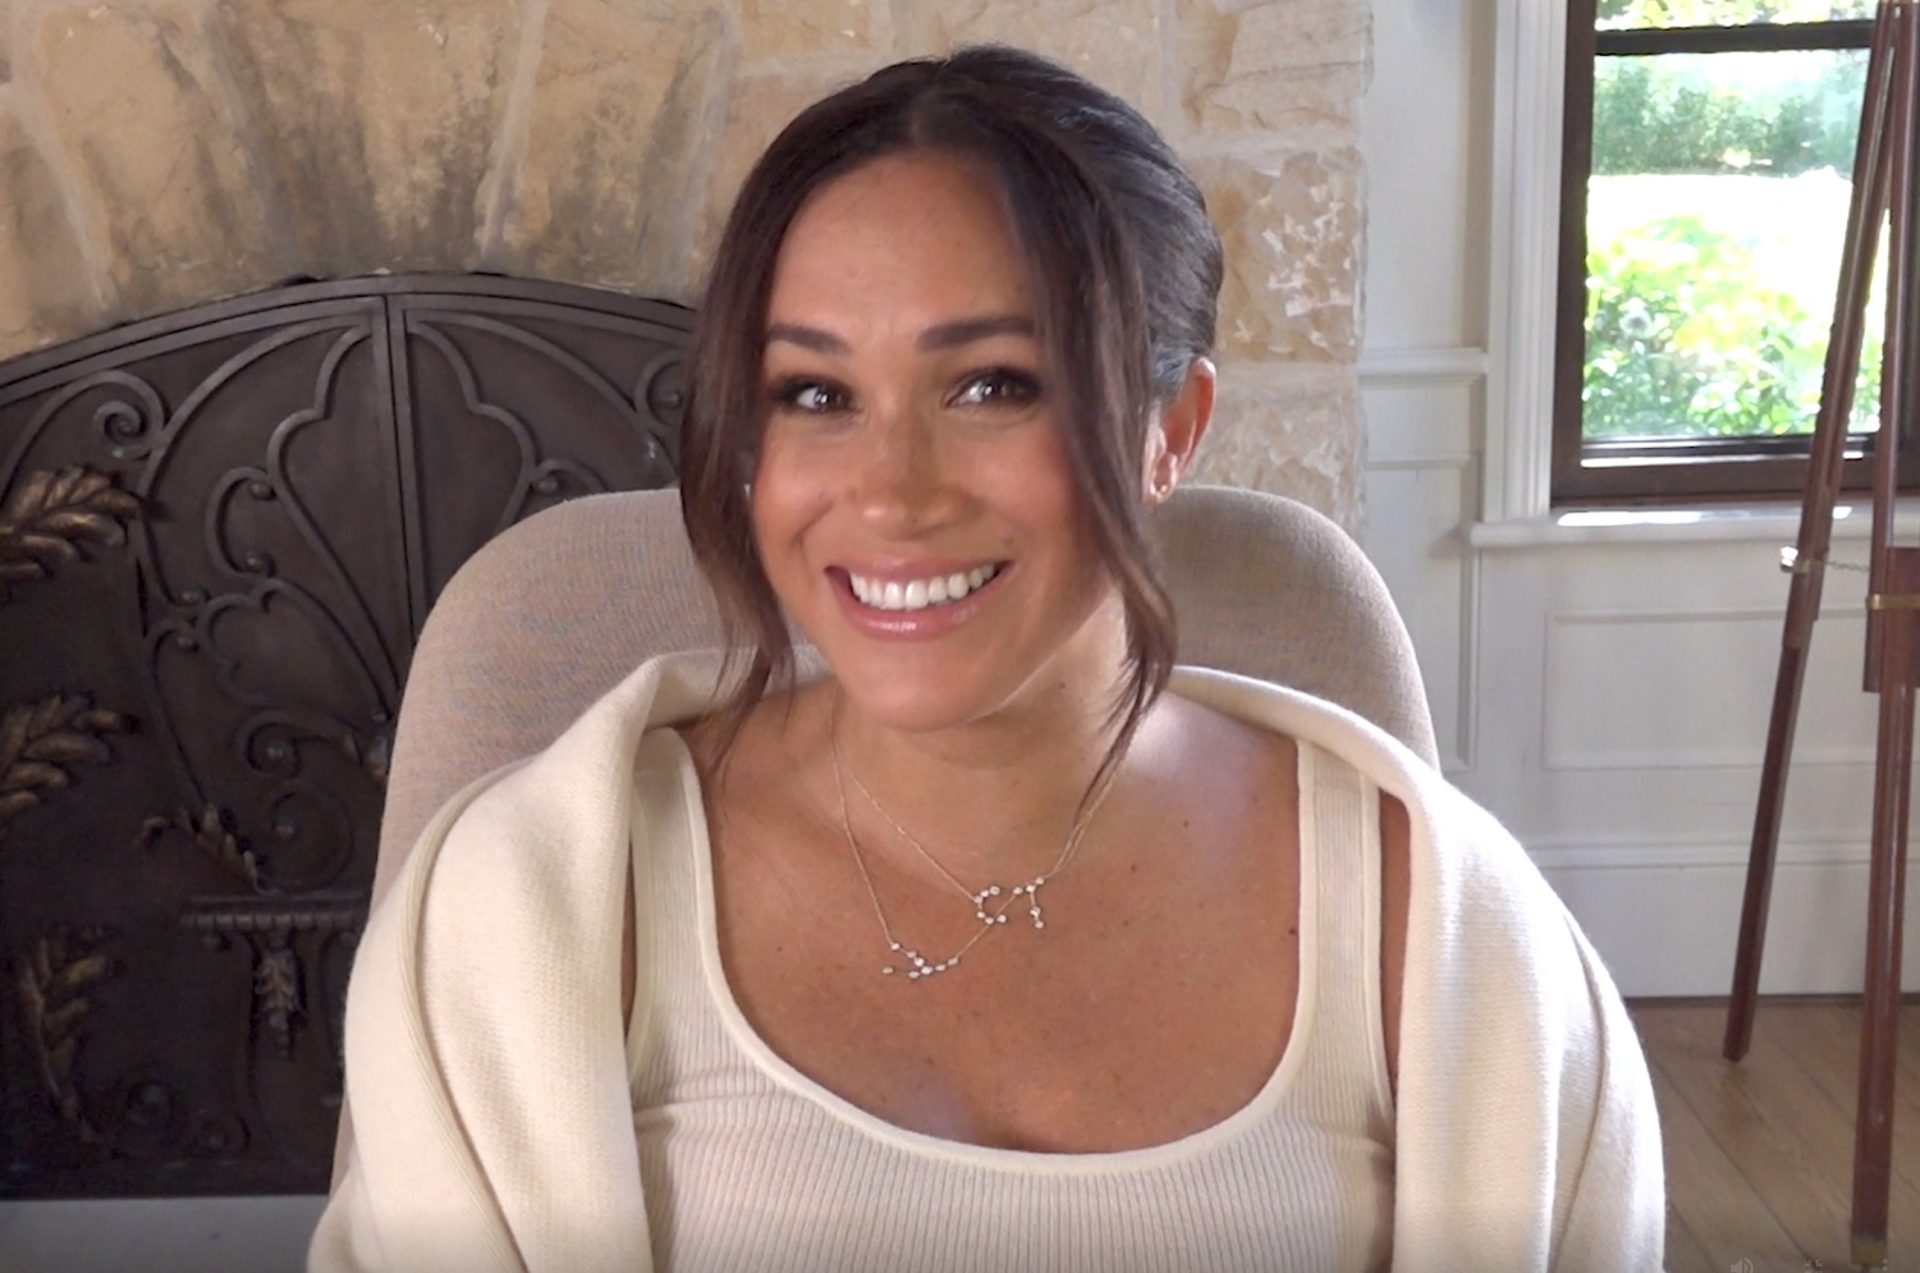 Meghan Markle Appropriate Paid Tribute to Archie and Lilibet With Her Birthday Necklaces